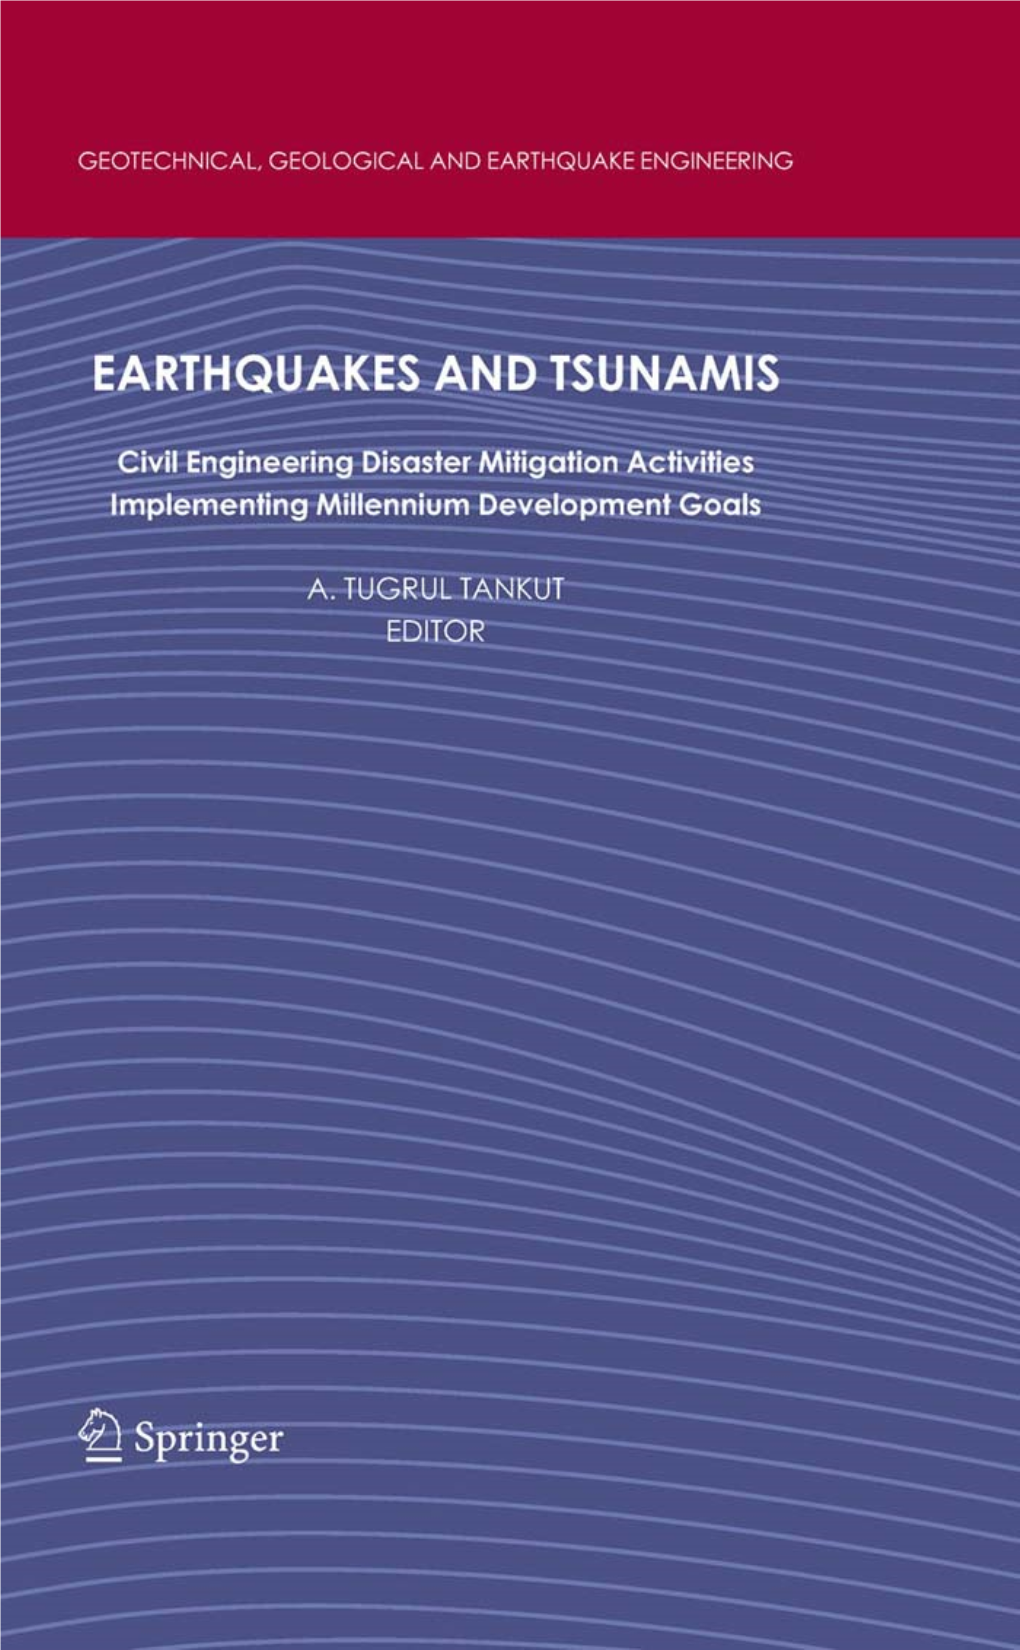 Earthquakes and Tsunamis: Civil Engineering Disaster Mitigation